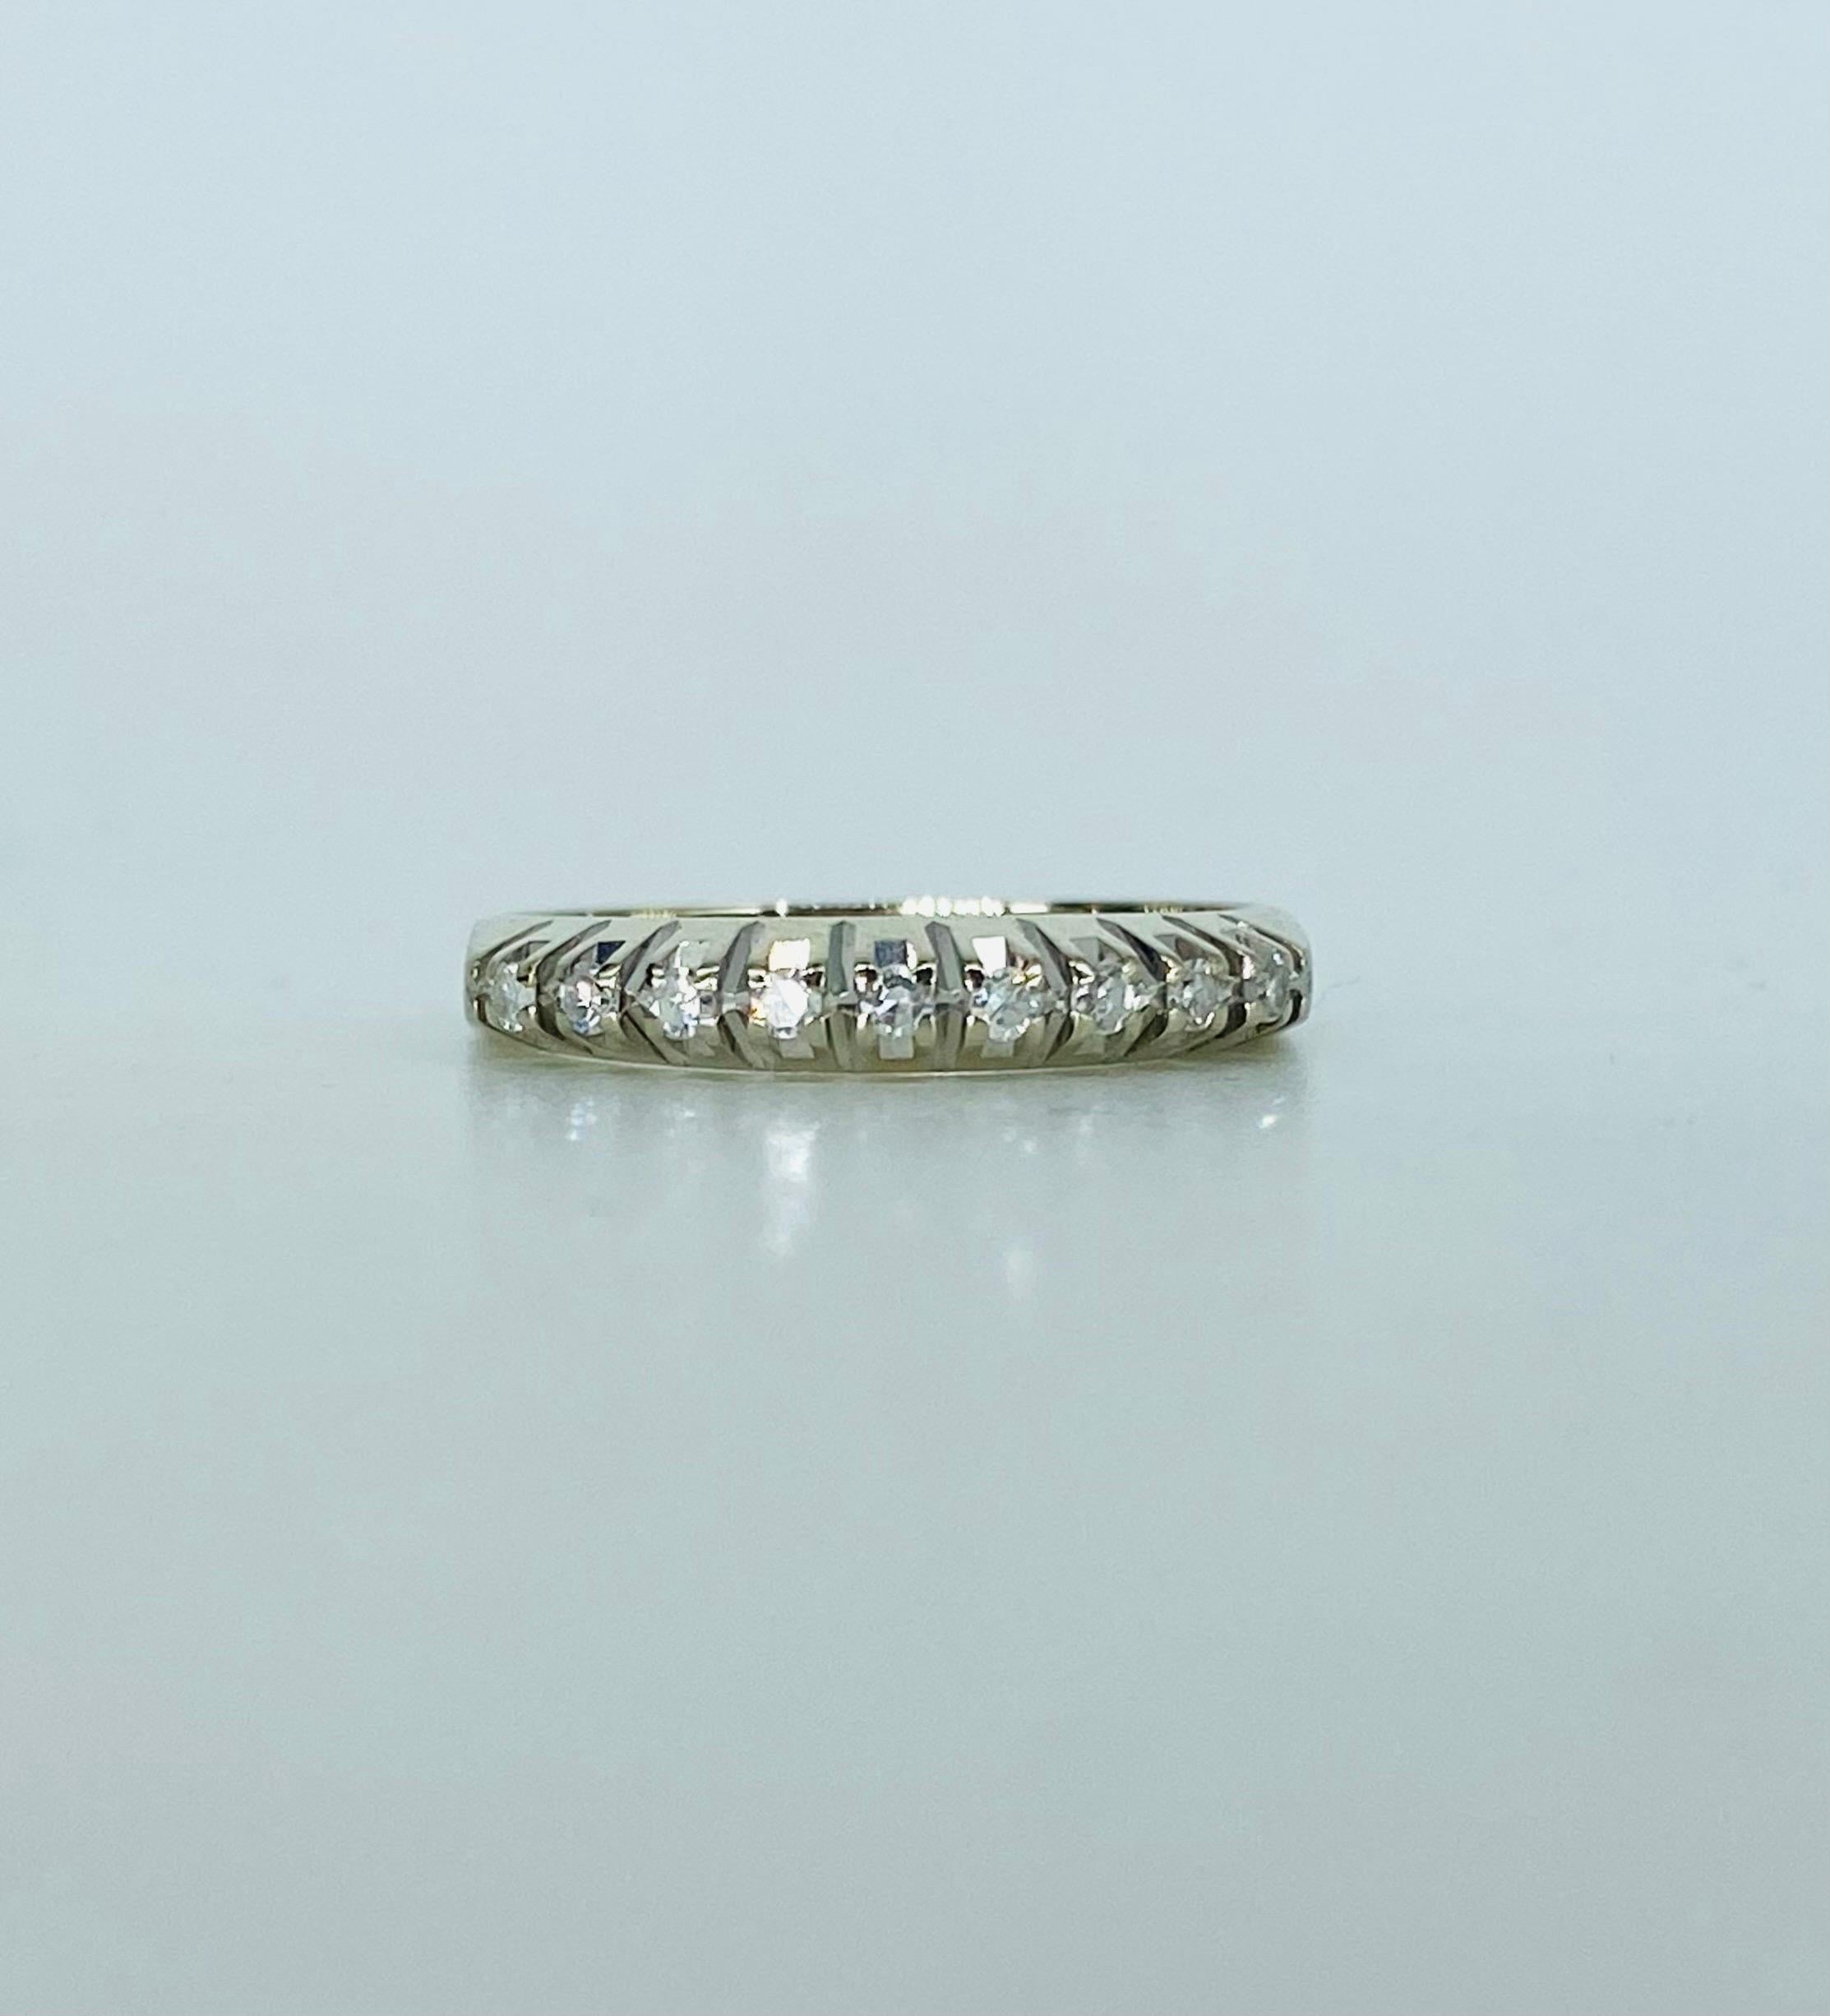 Vintage 0.13 Carat Diamonds Half Eternity Ring 18k White Gold. Very nice and unique design the way the diamonds are set. There are 9 round diamonds each weighting approx 0.015ct each for a total of 0.13 carat. The diamonds Brings out more brilliance